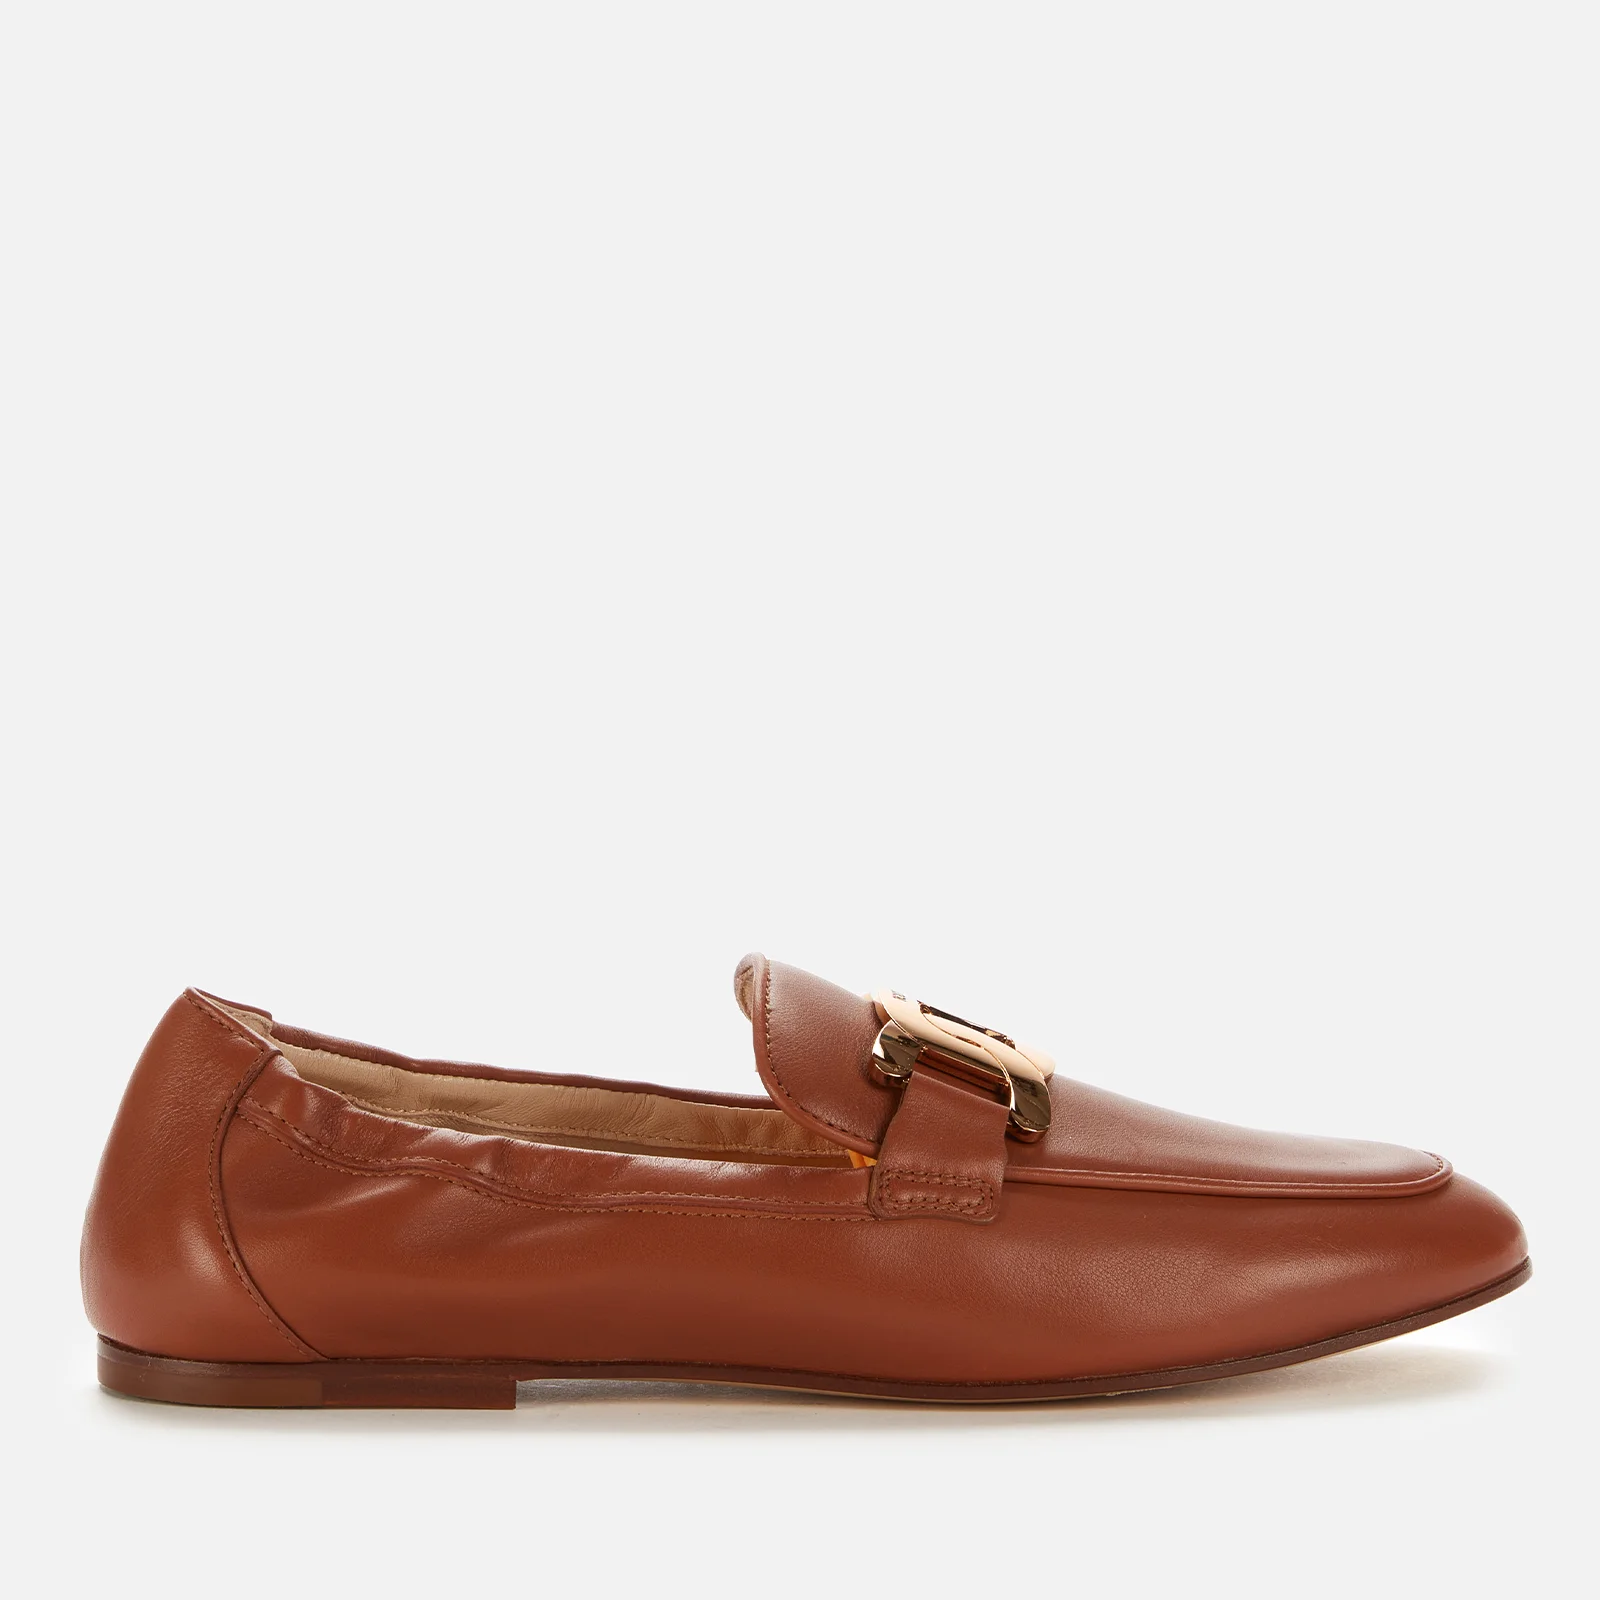 Tod's Women's Kate Leather Loafers - Tan Image 1